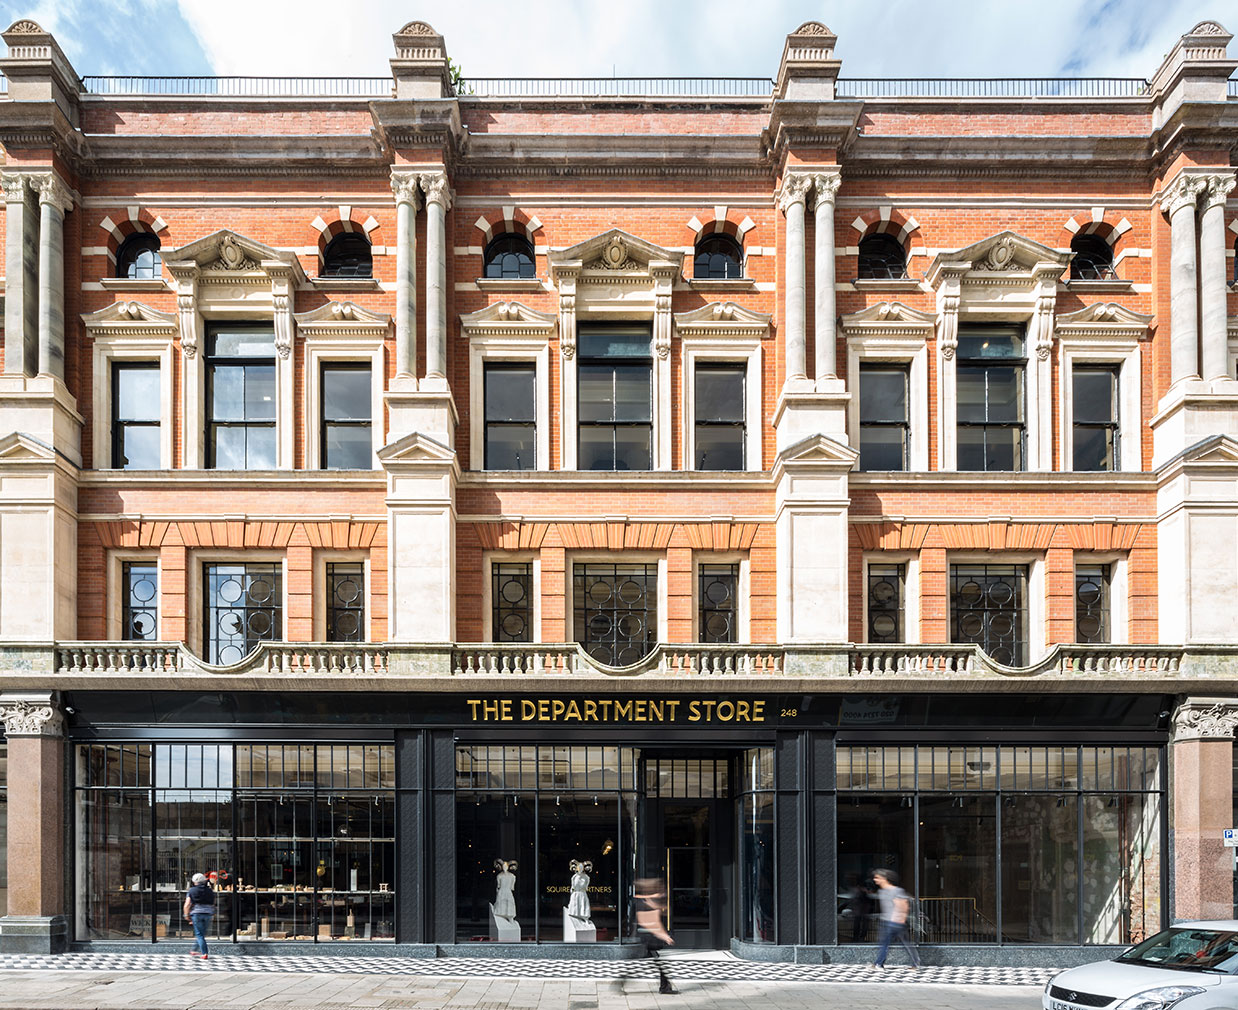 Squire & Partners' The Department Store in Brixton